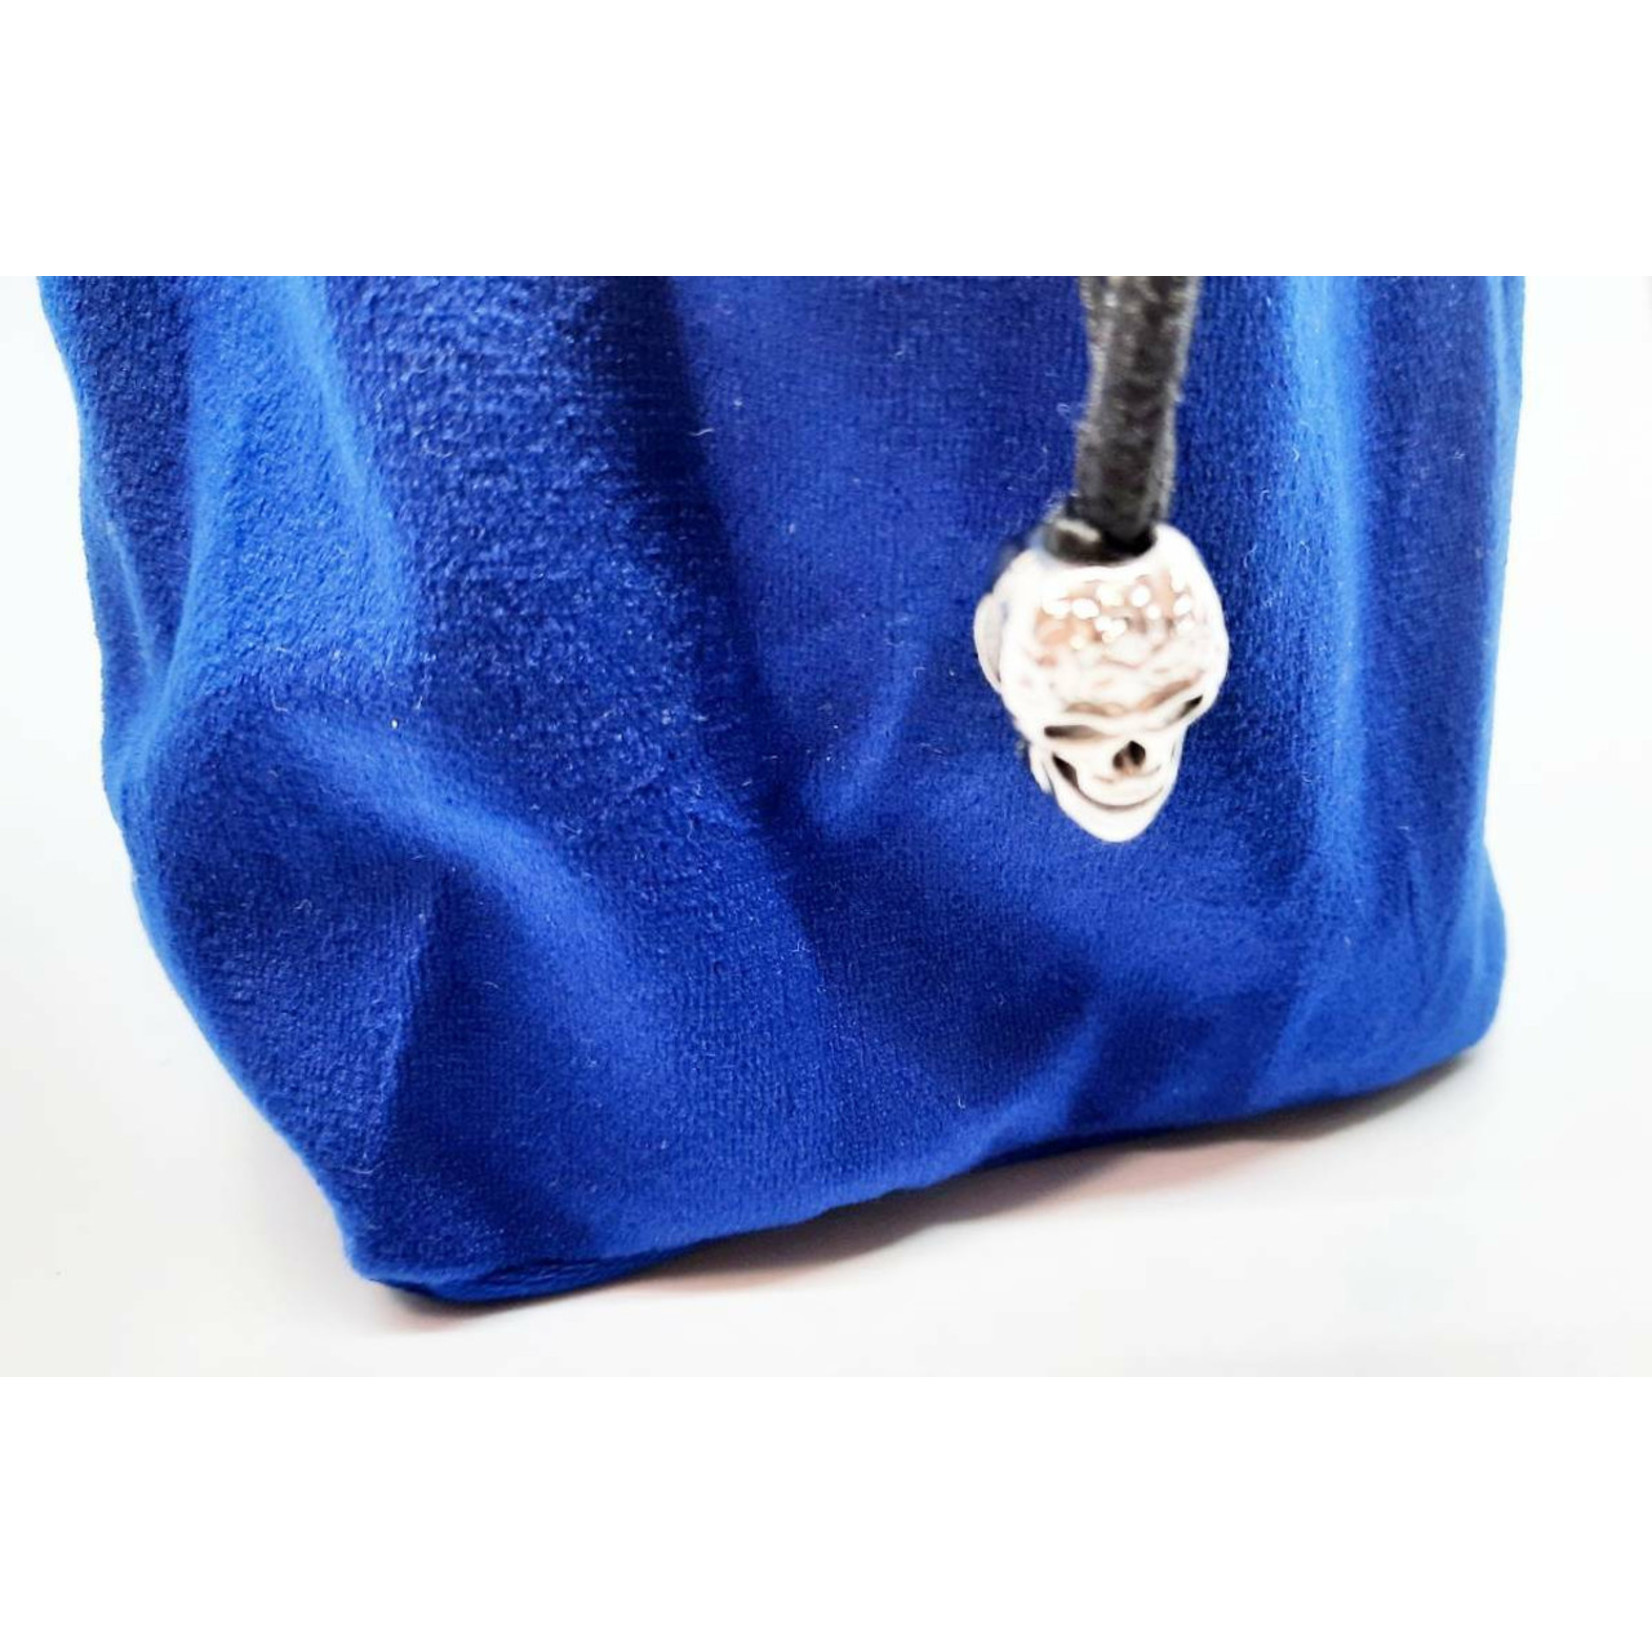 Old School Bag of Many Pouches RPG DnD Dice Bag: Royal Blue